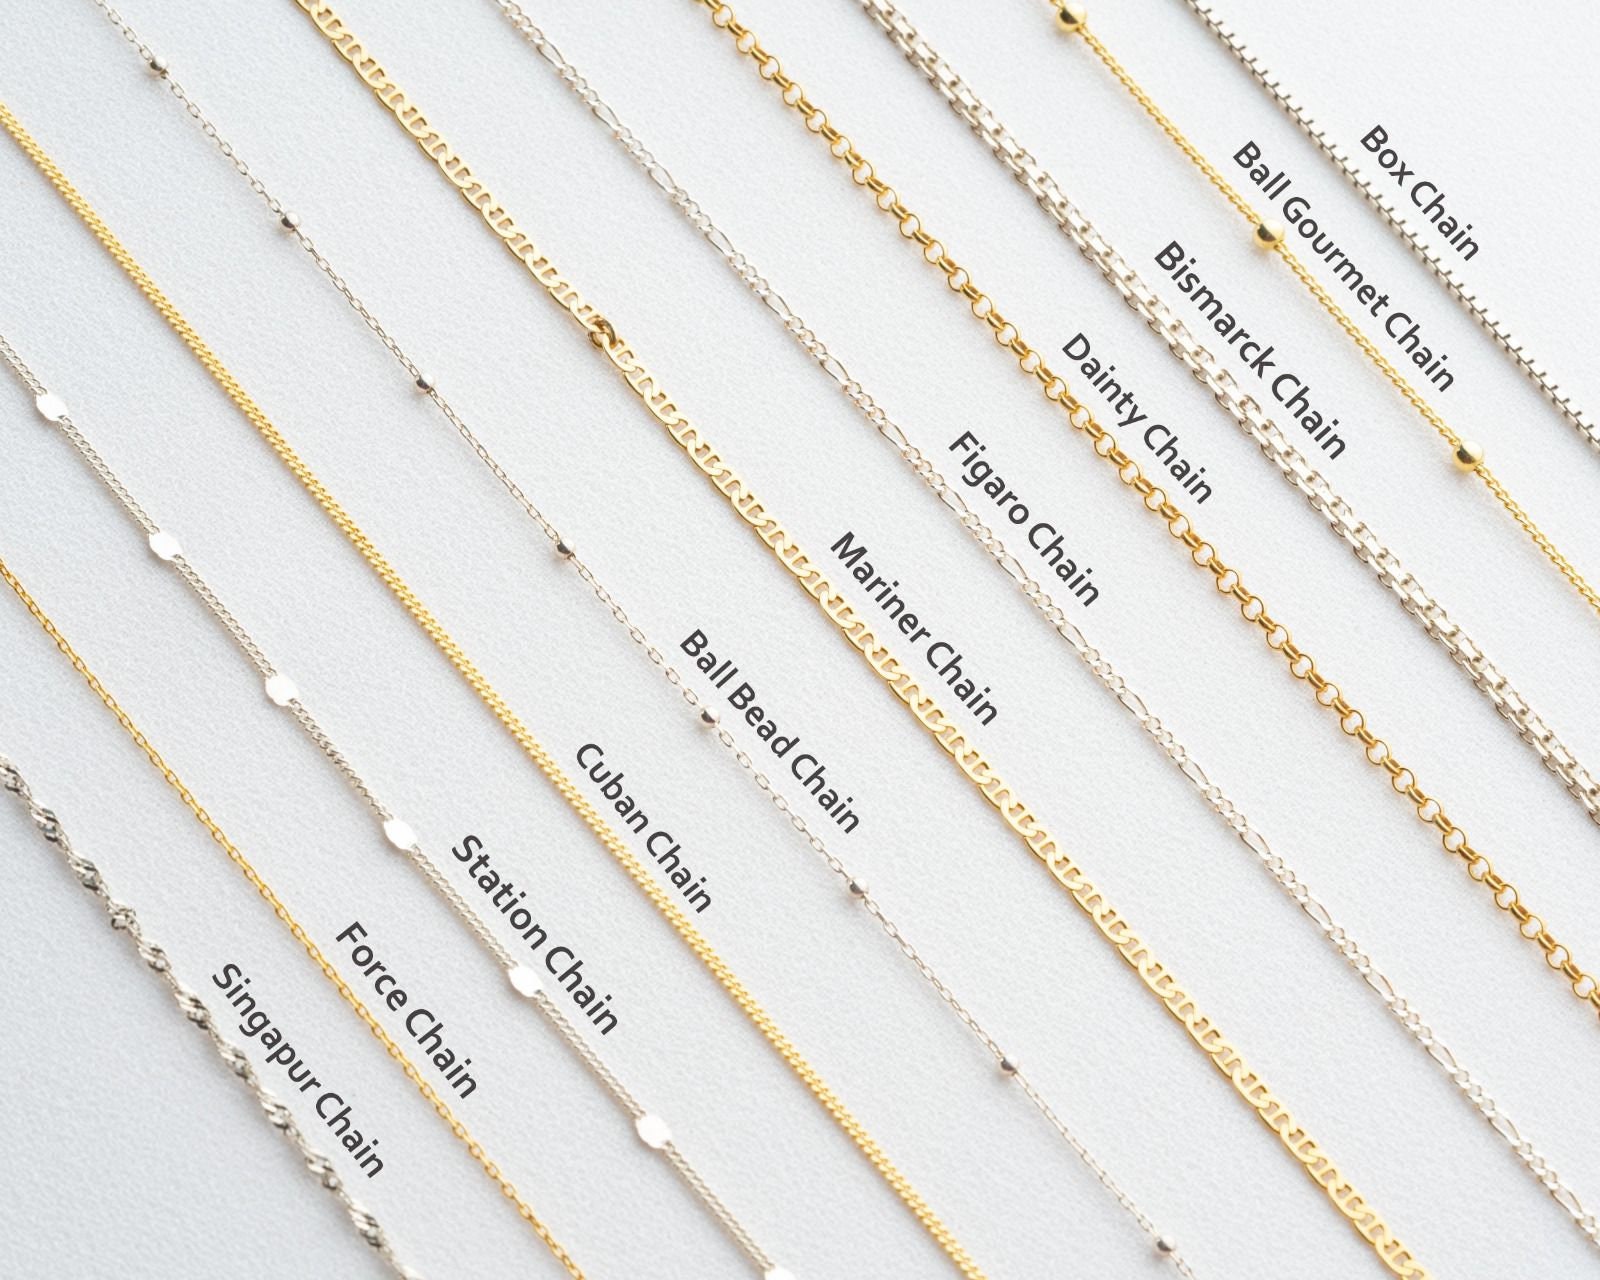 Whisper Chain • Gold, Silver, or Rose Gold - Simple Gold Chain Choker -  Dainty Necklace - Layering - Thin Chain Necklace - Basic Finished